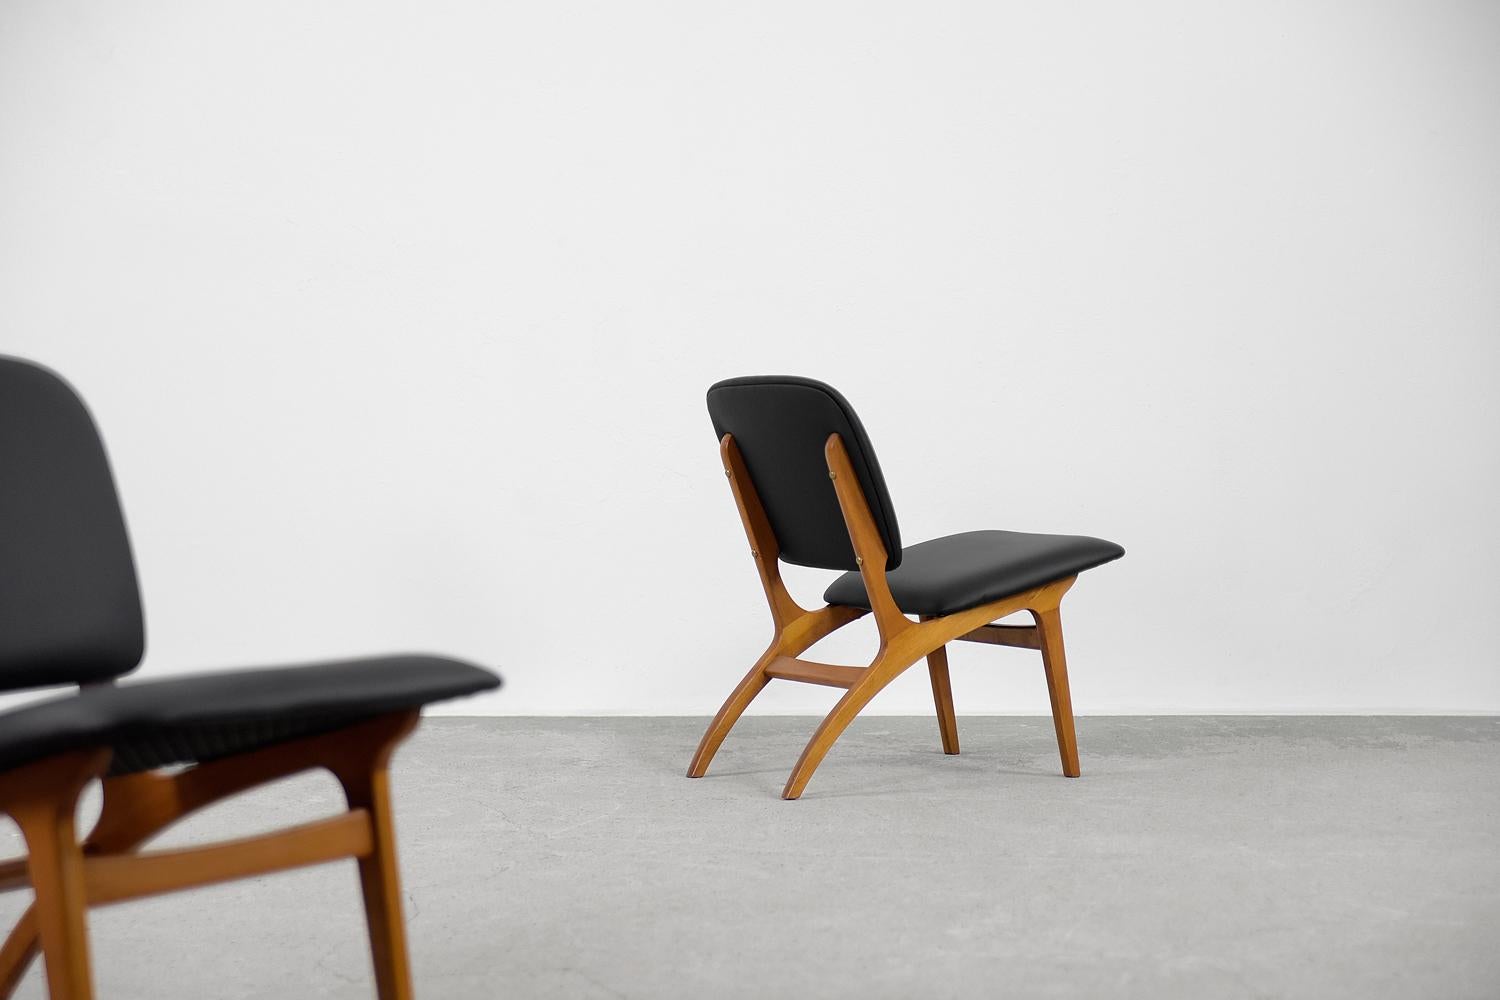 Swedish Pair of Mid-Century Modern Vintage Jylland Beech Wood Chairs from Jio Möbler For Sale